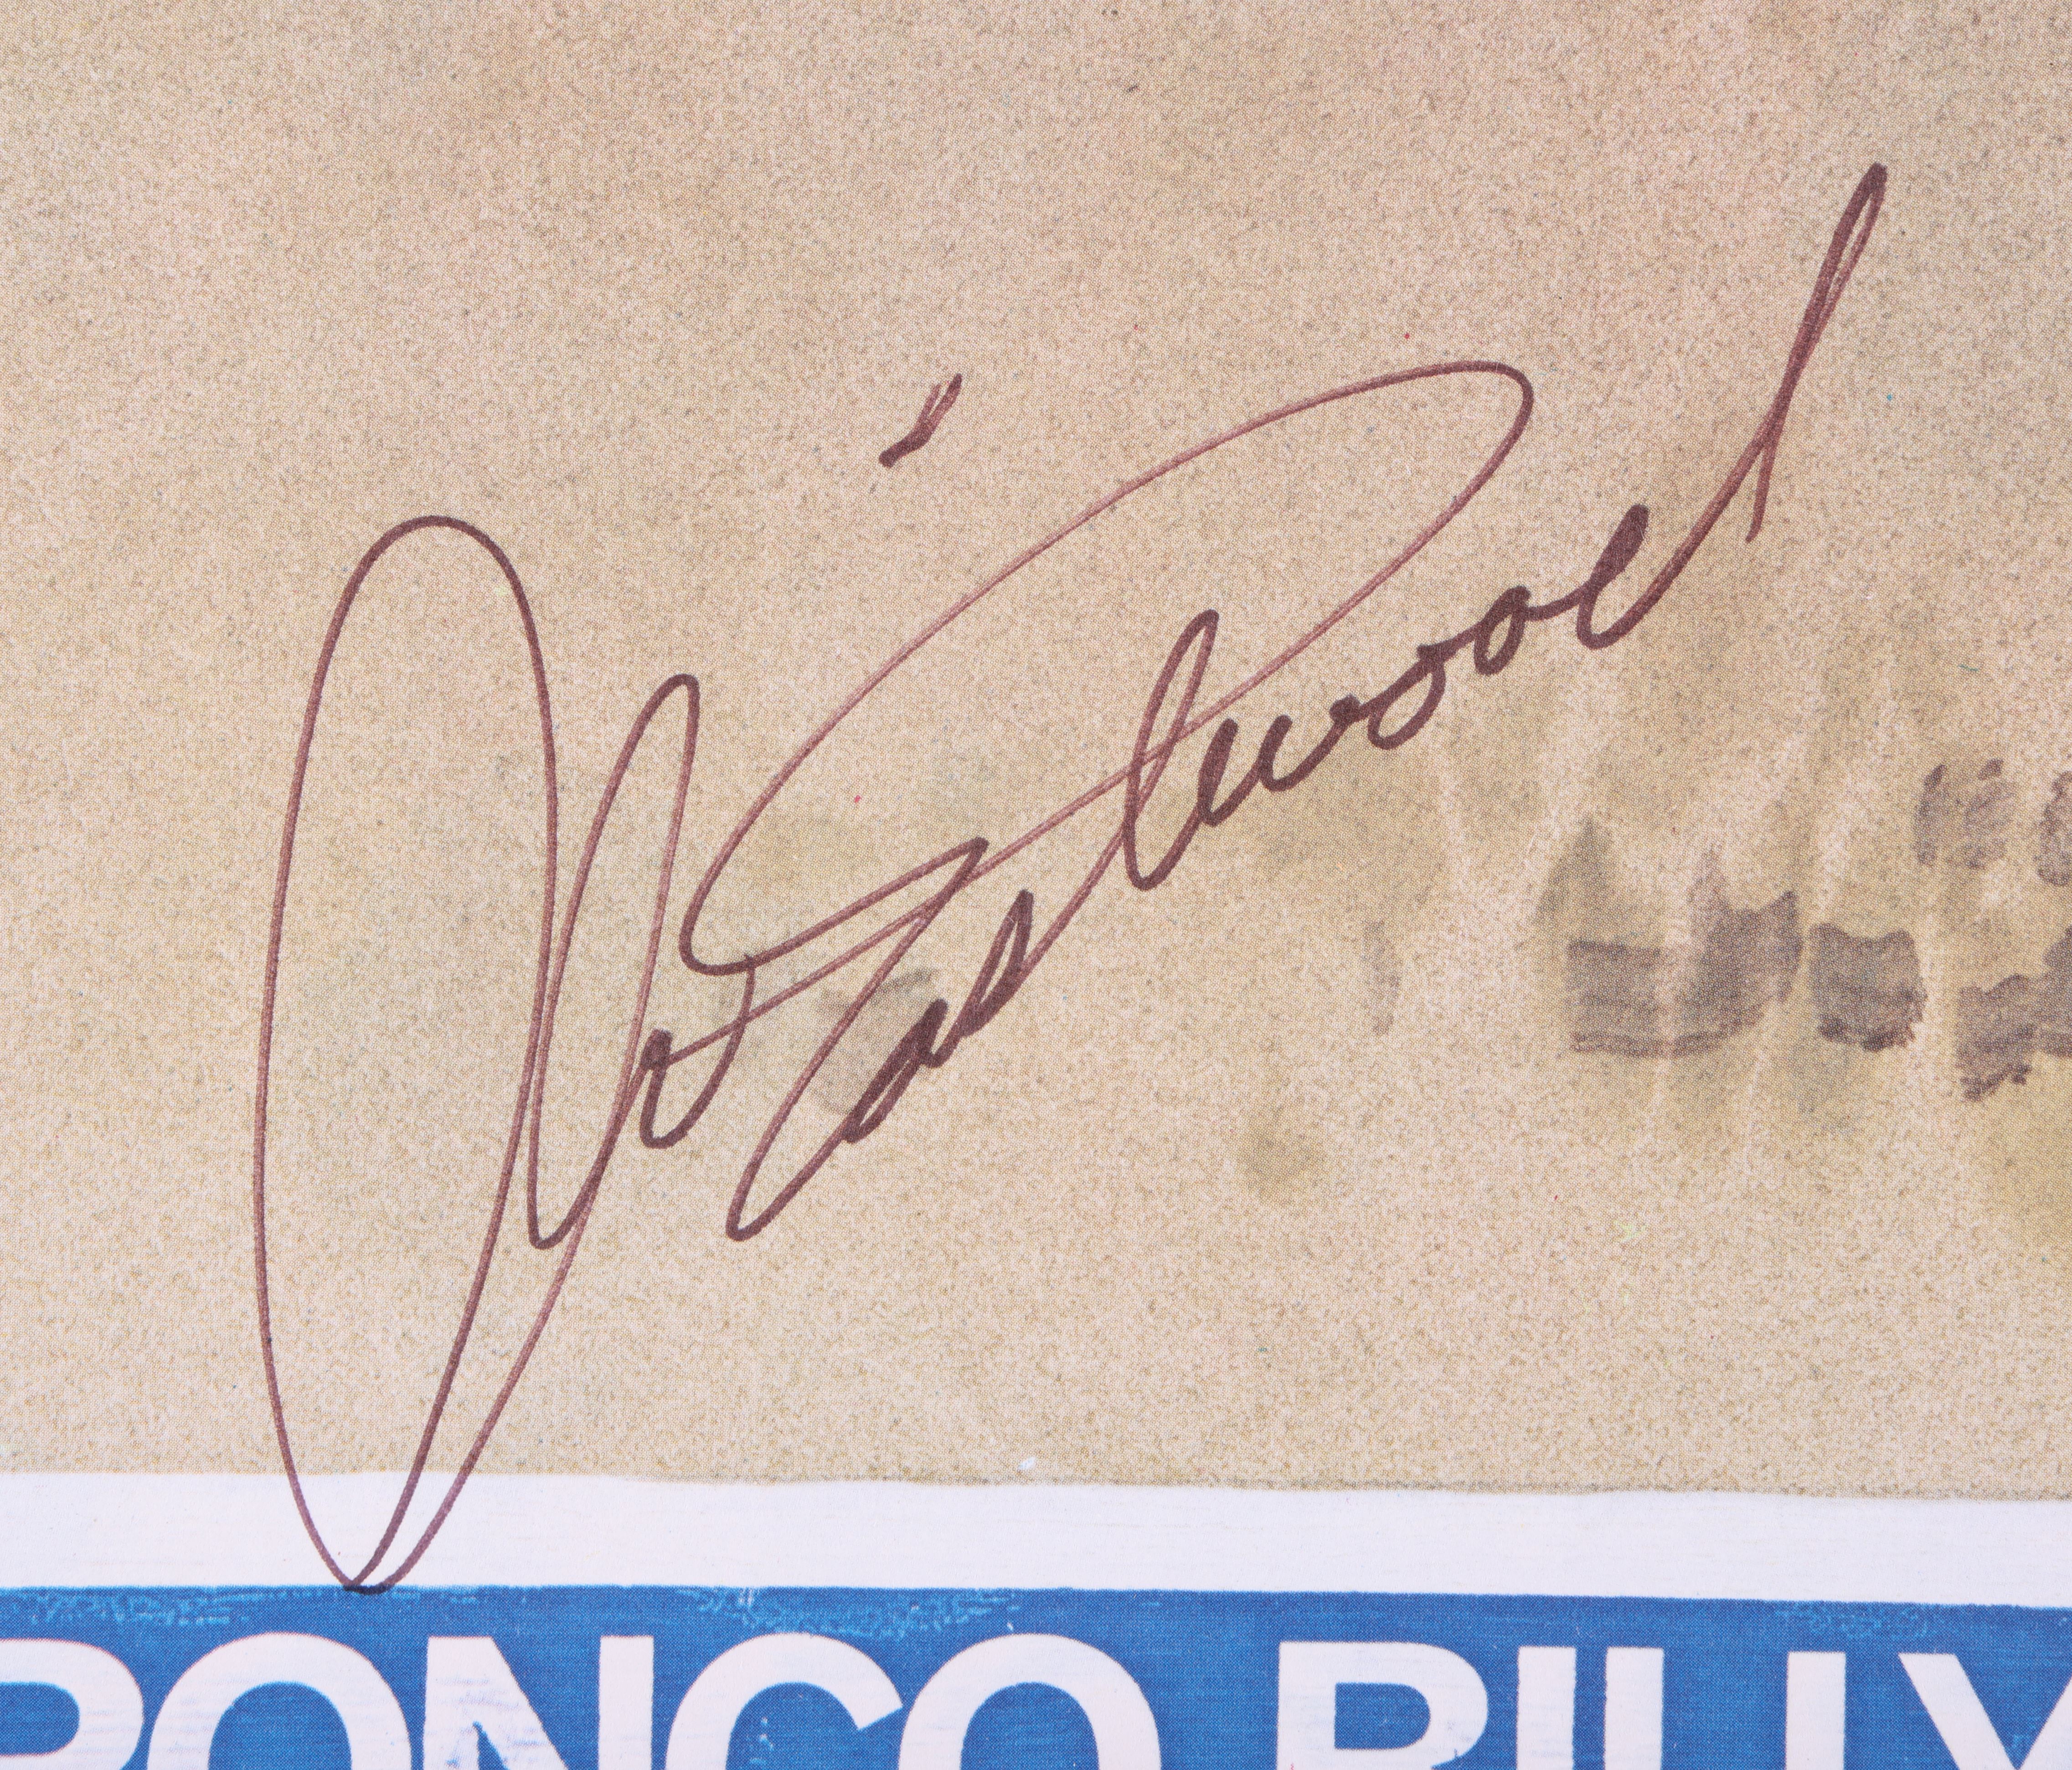 BRONCO BILLY (1980) - David Frangioni Collection: Clint Eastwood Autographed Special Promotional Pos - Image 2 of 2